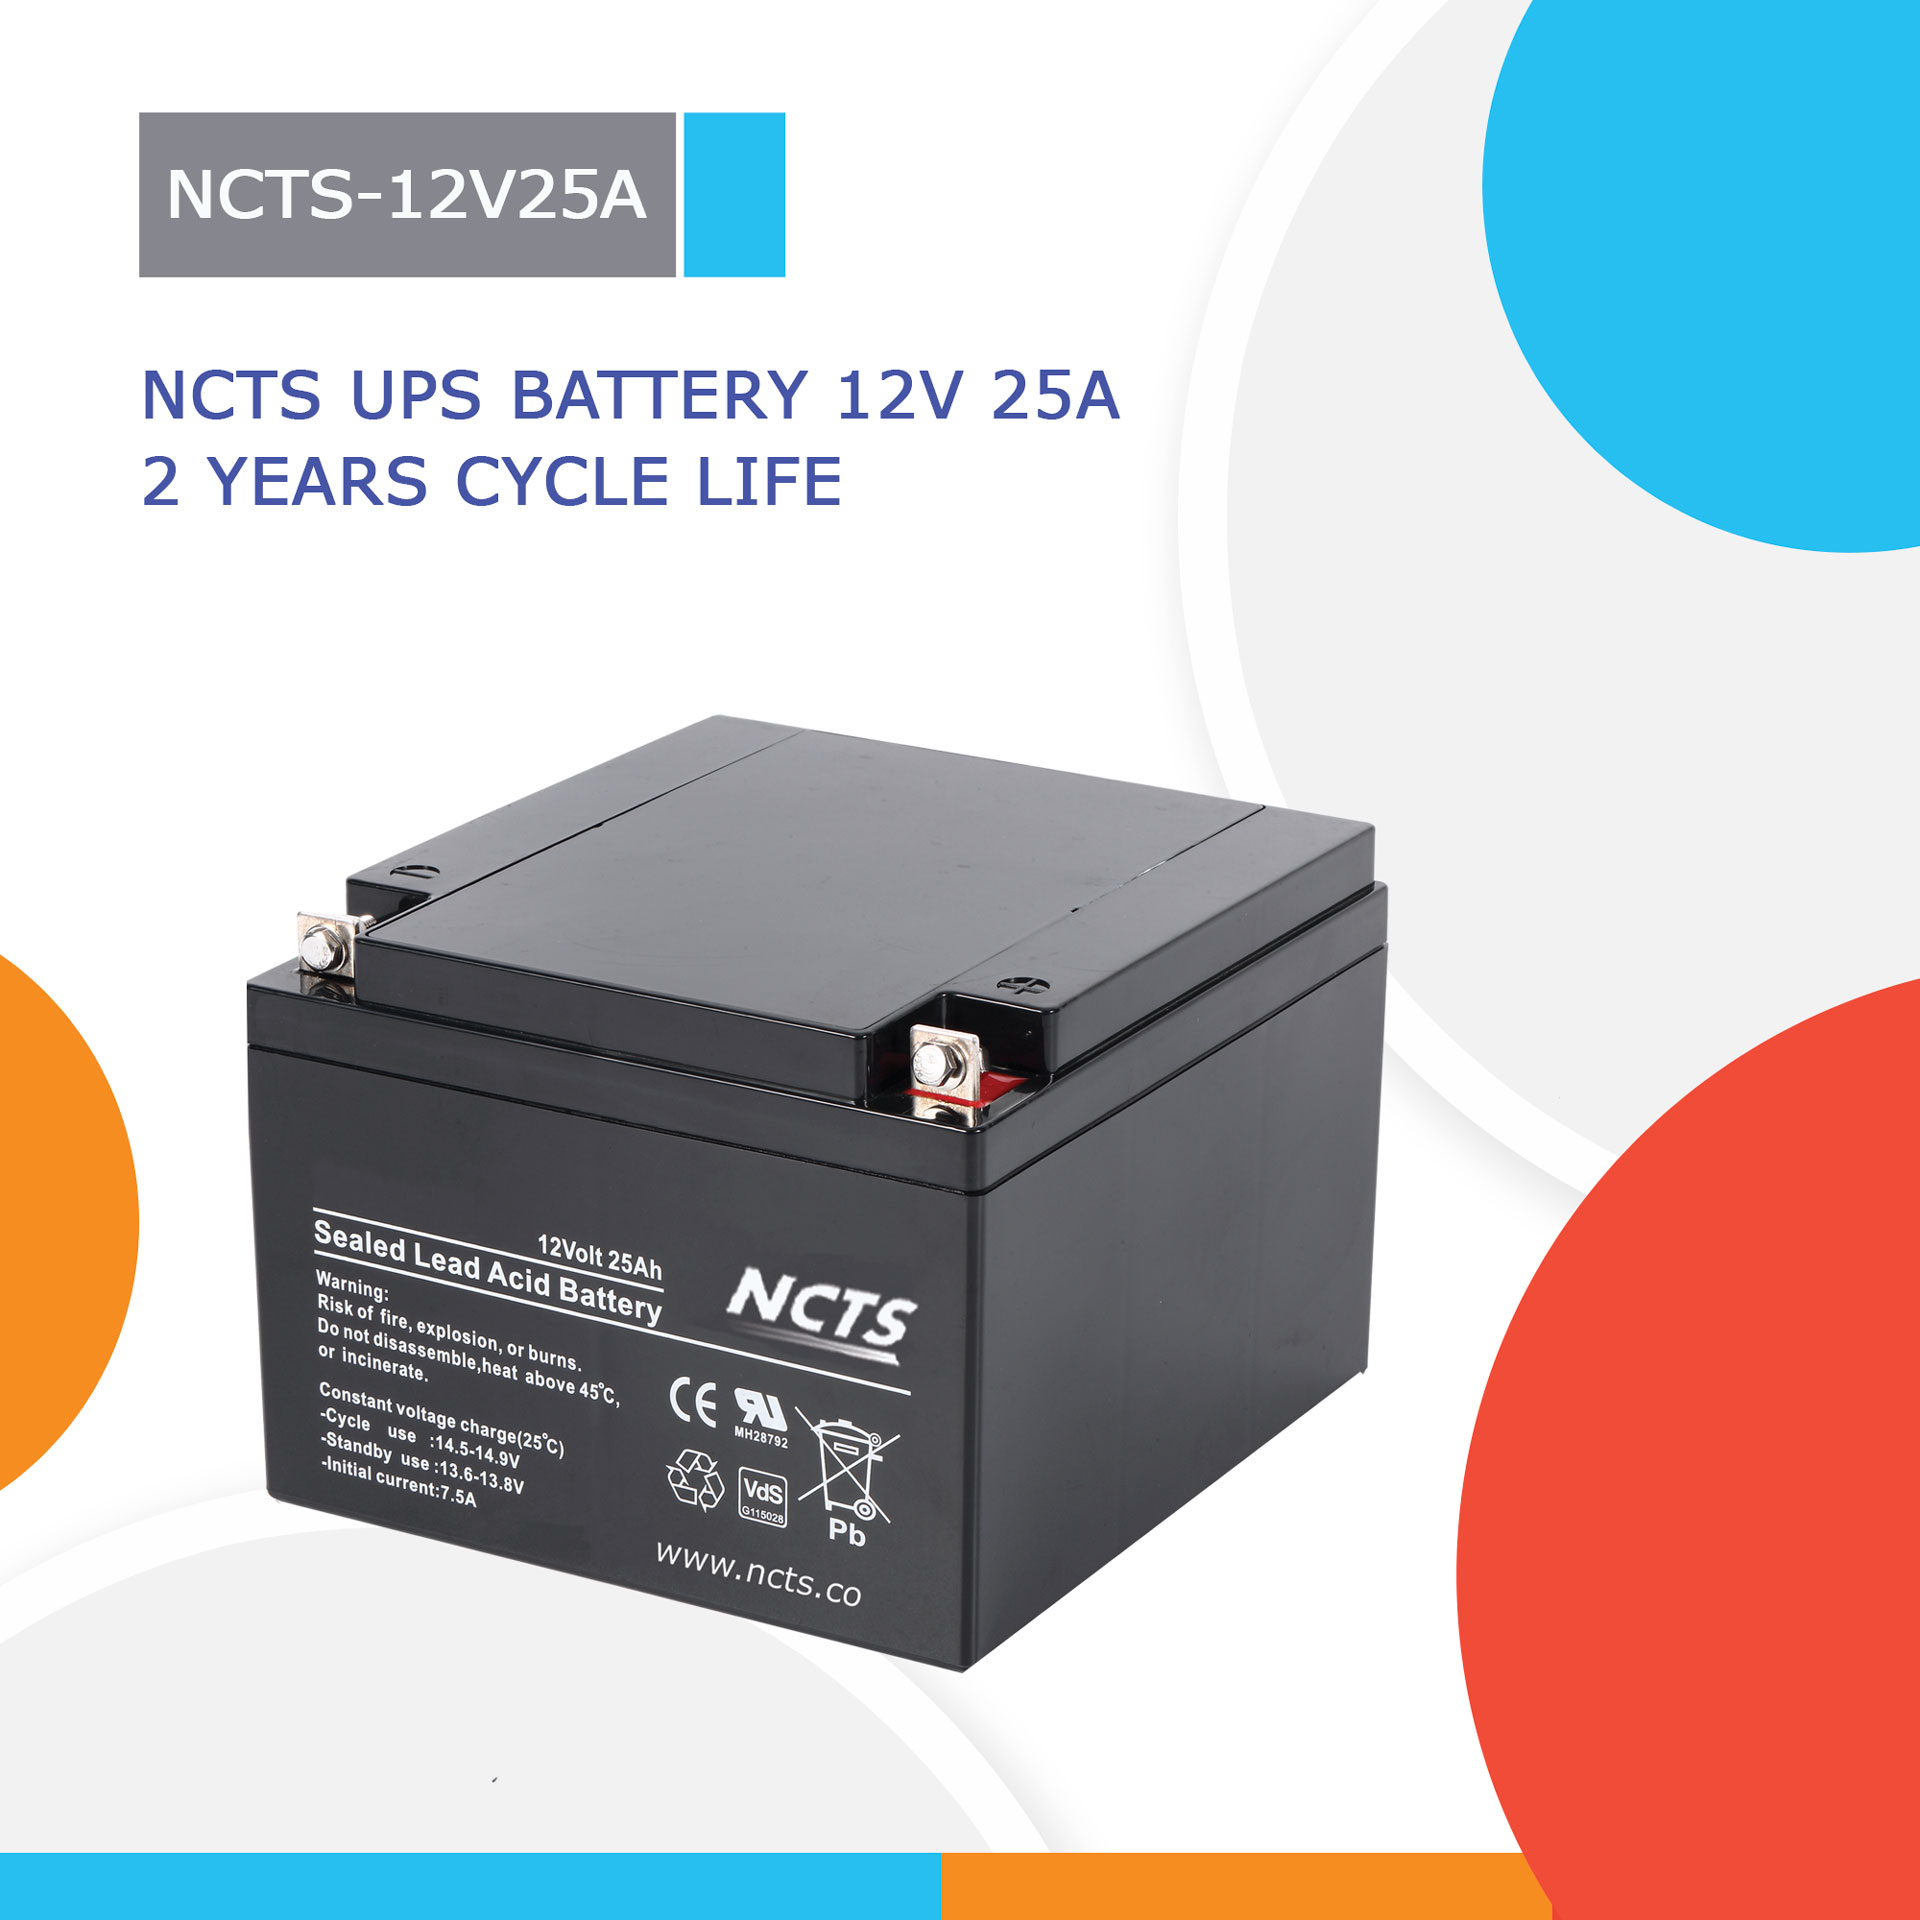 NCTS-12V25A